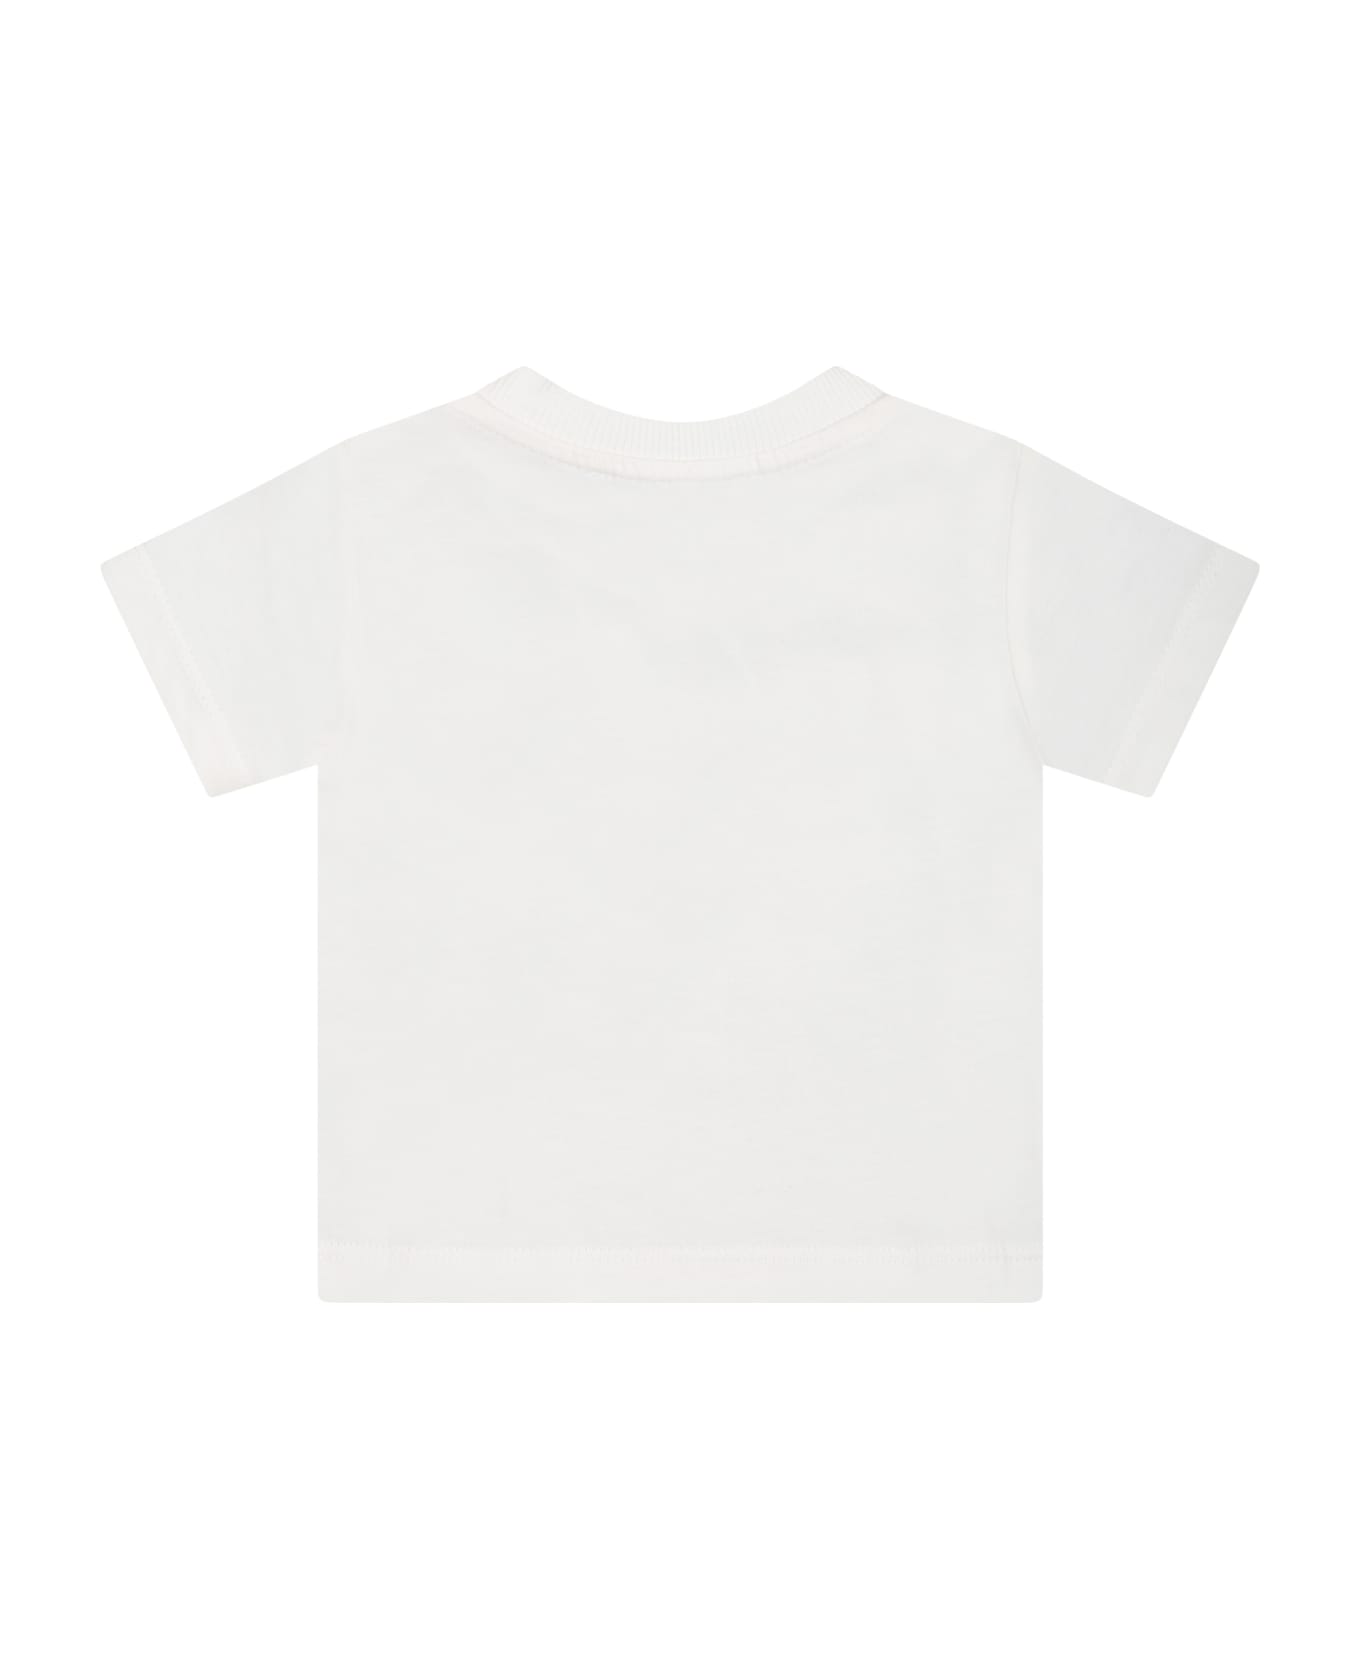 Moschino White T-shirt For Babies With Teddy Bear - White